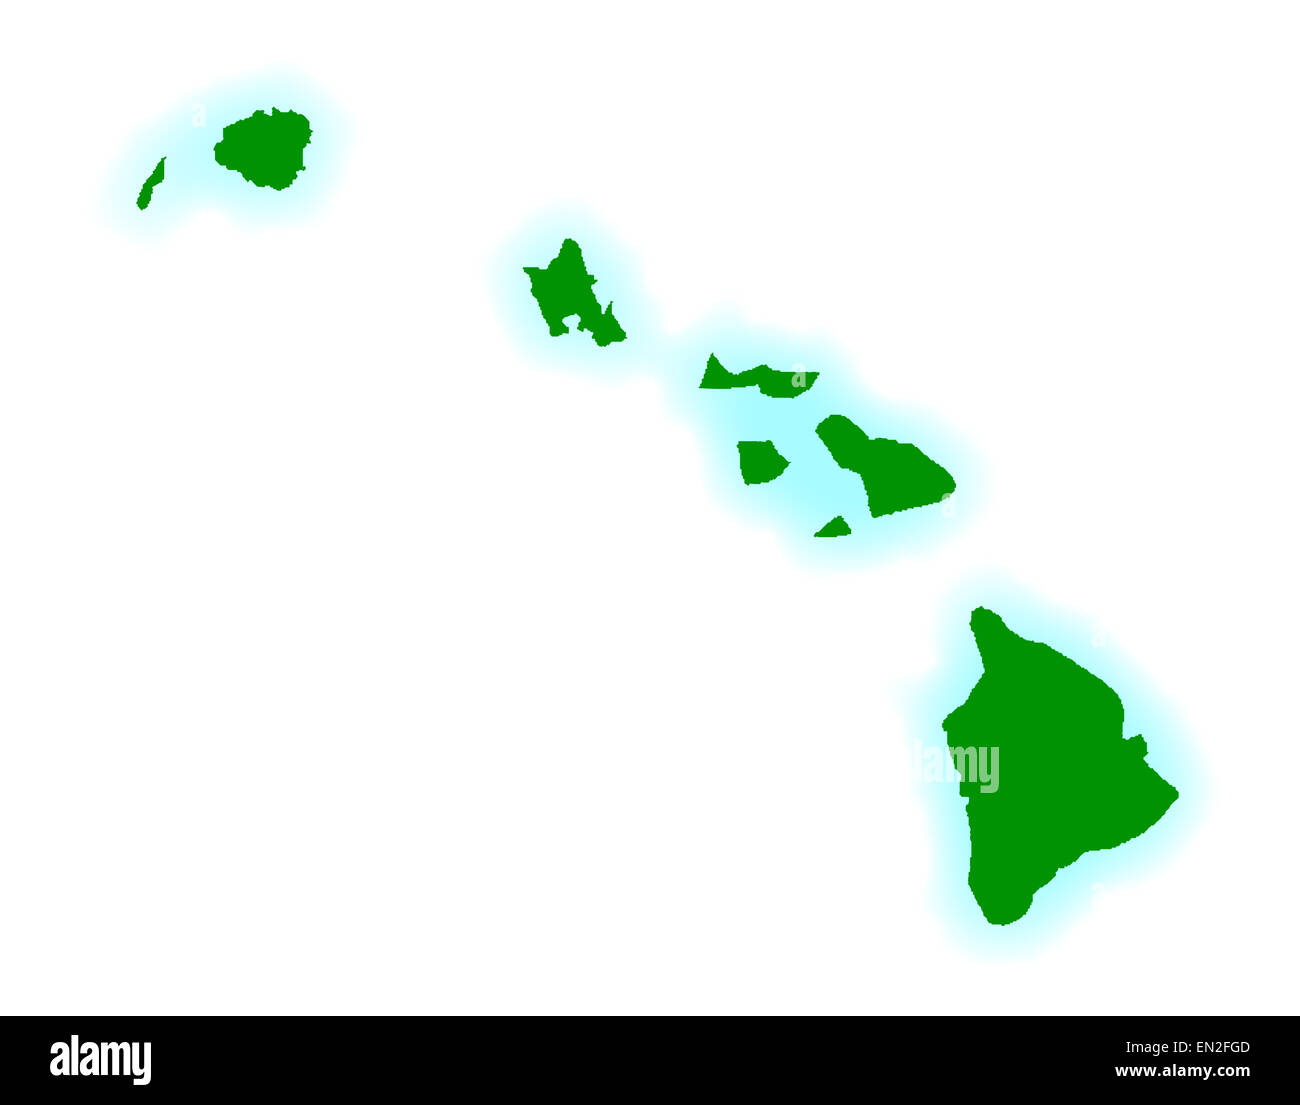 Outline map of the islands of Hawaii over a white background Stock Photo